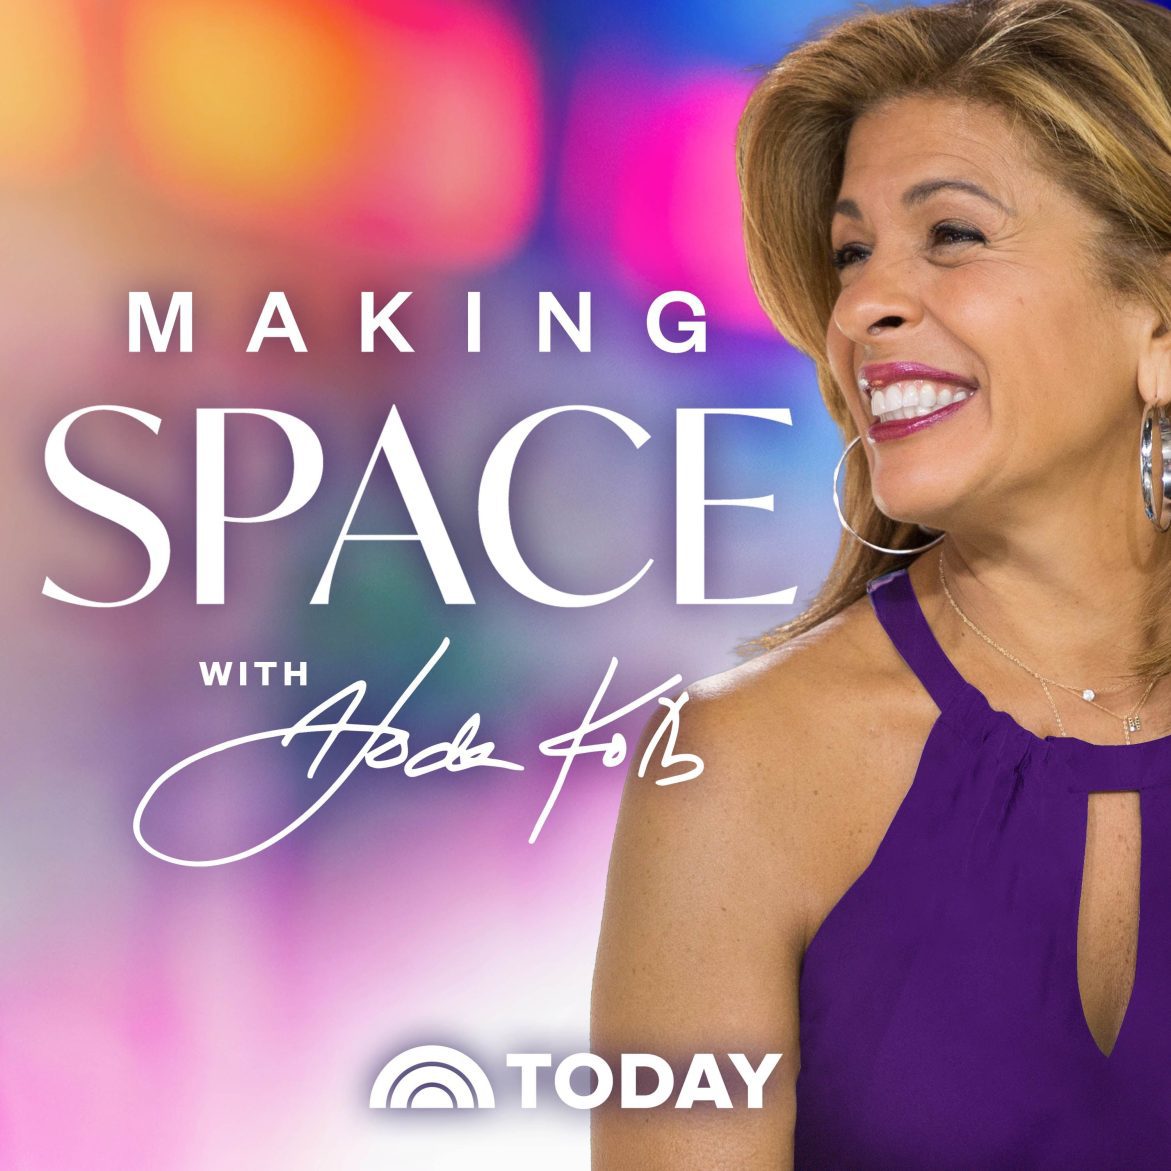 Black Podcasting - Keith Morrison on Making Space with Hoda Kotb